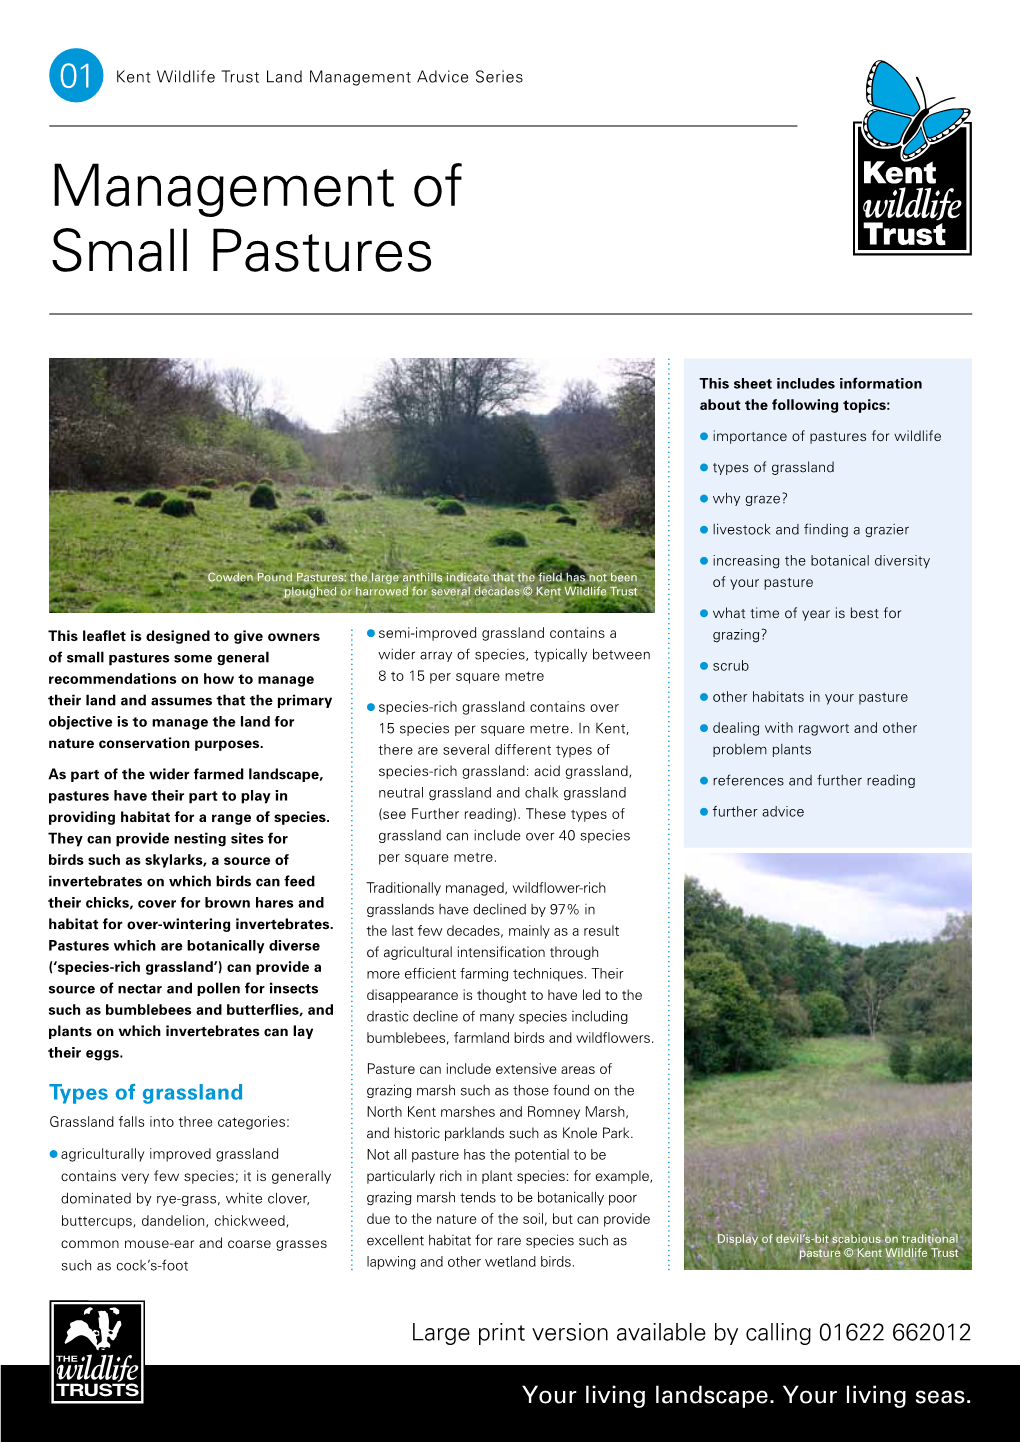 1 Management of Small Pastures (Pdf)